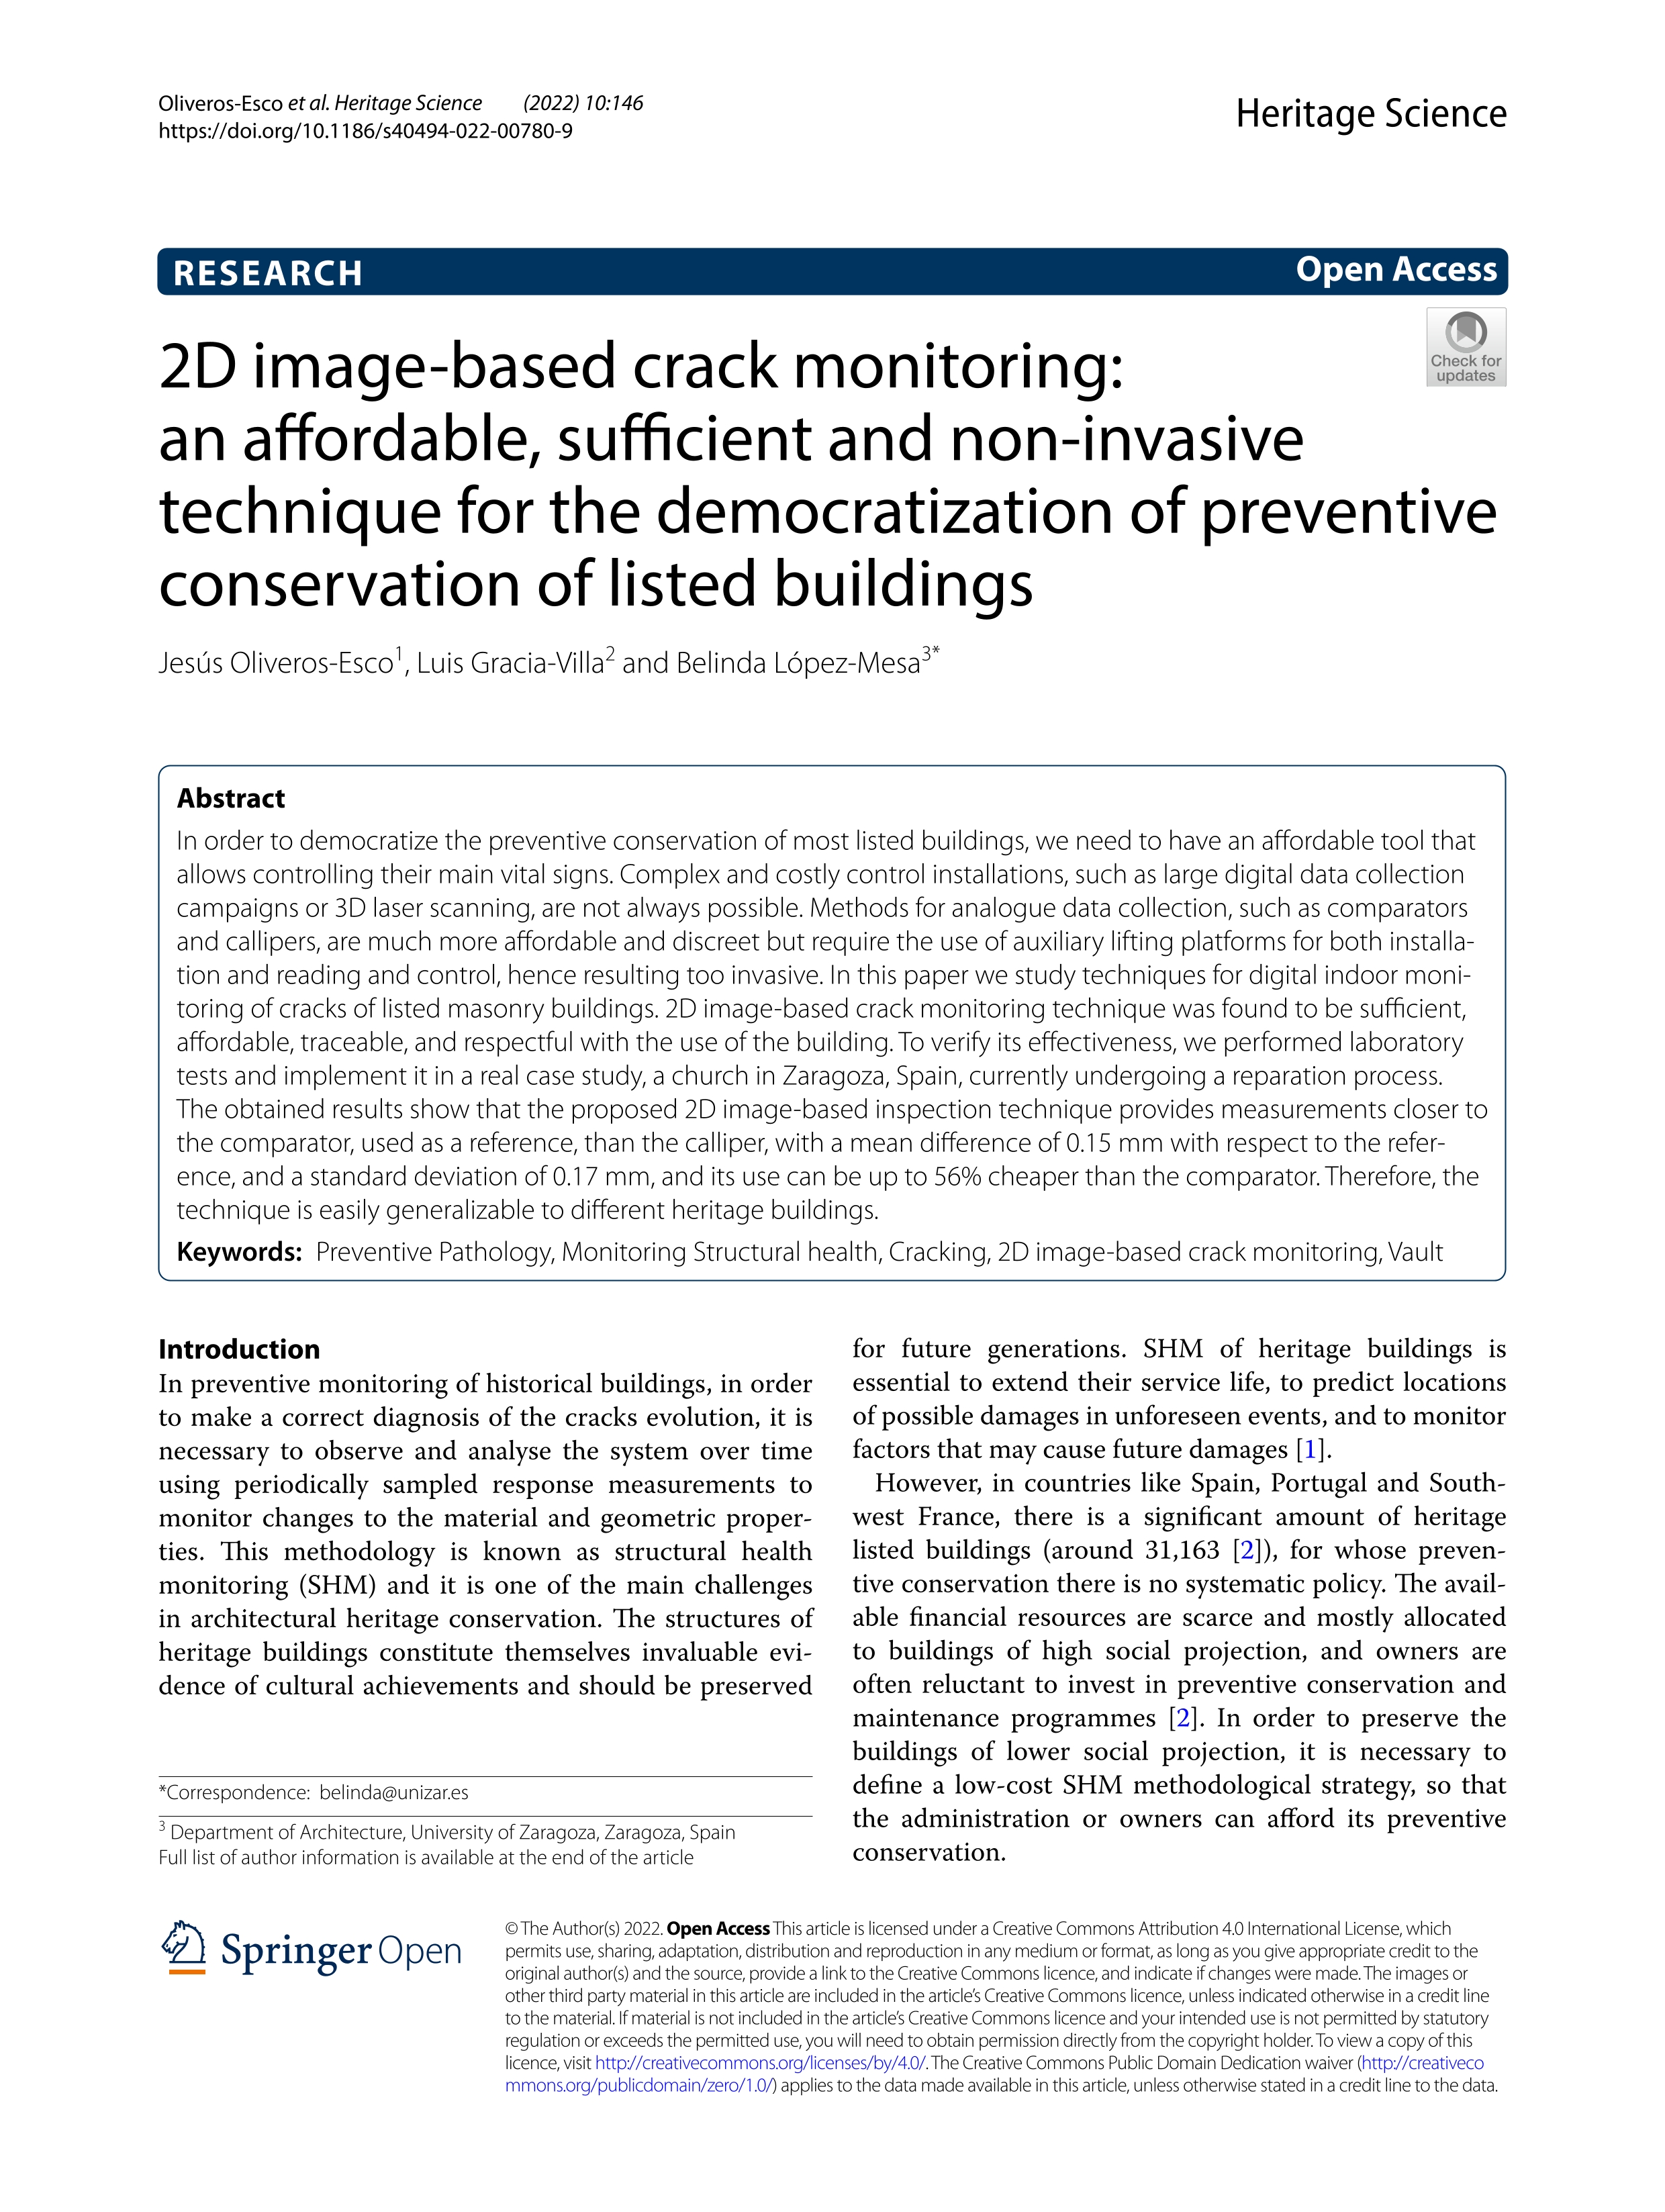 2D image-based crack monitoring: an affordable, sufficient and non-invasive technique for the democratization of preventive conservation of listed buildings